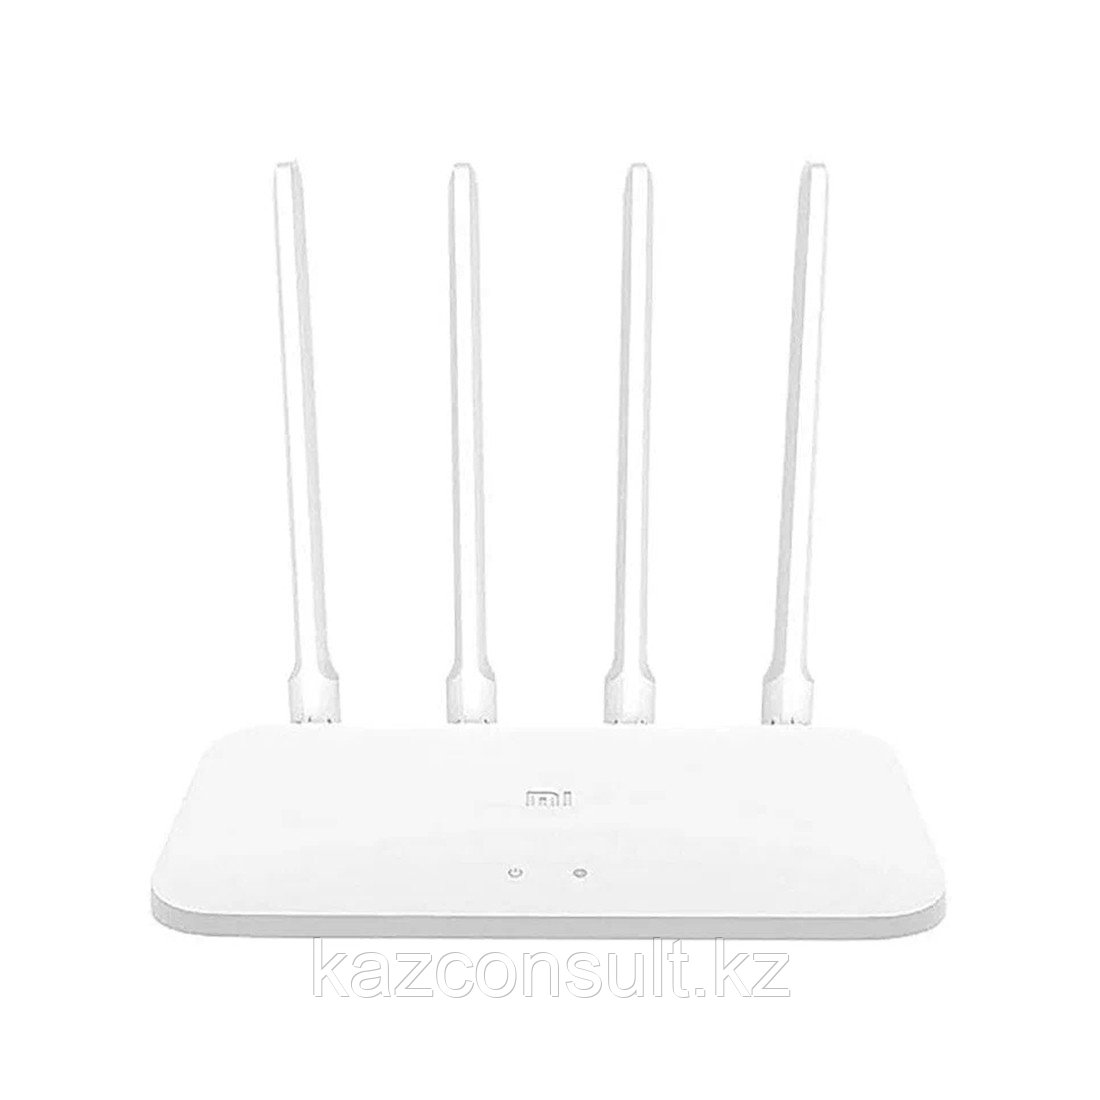 Маршрутизатор Xiaomi Router AC1200 - фото 2 - id-p107603078